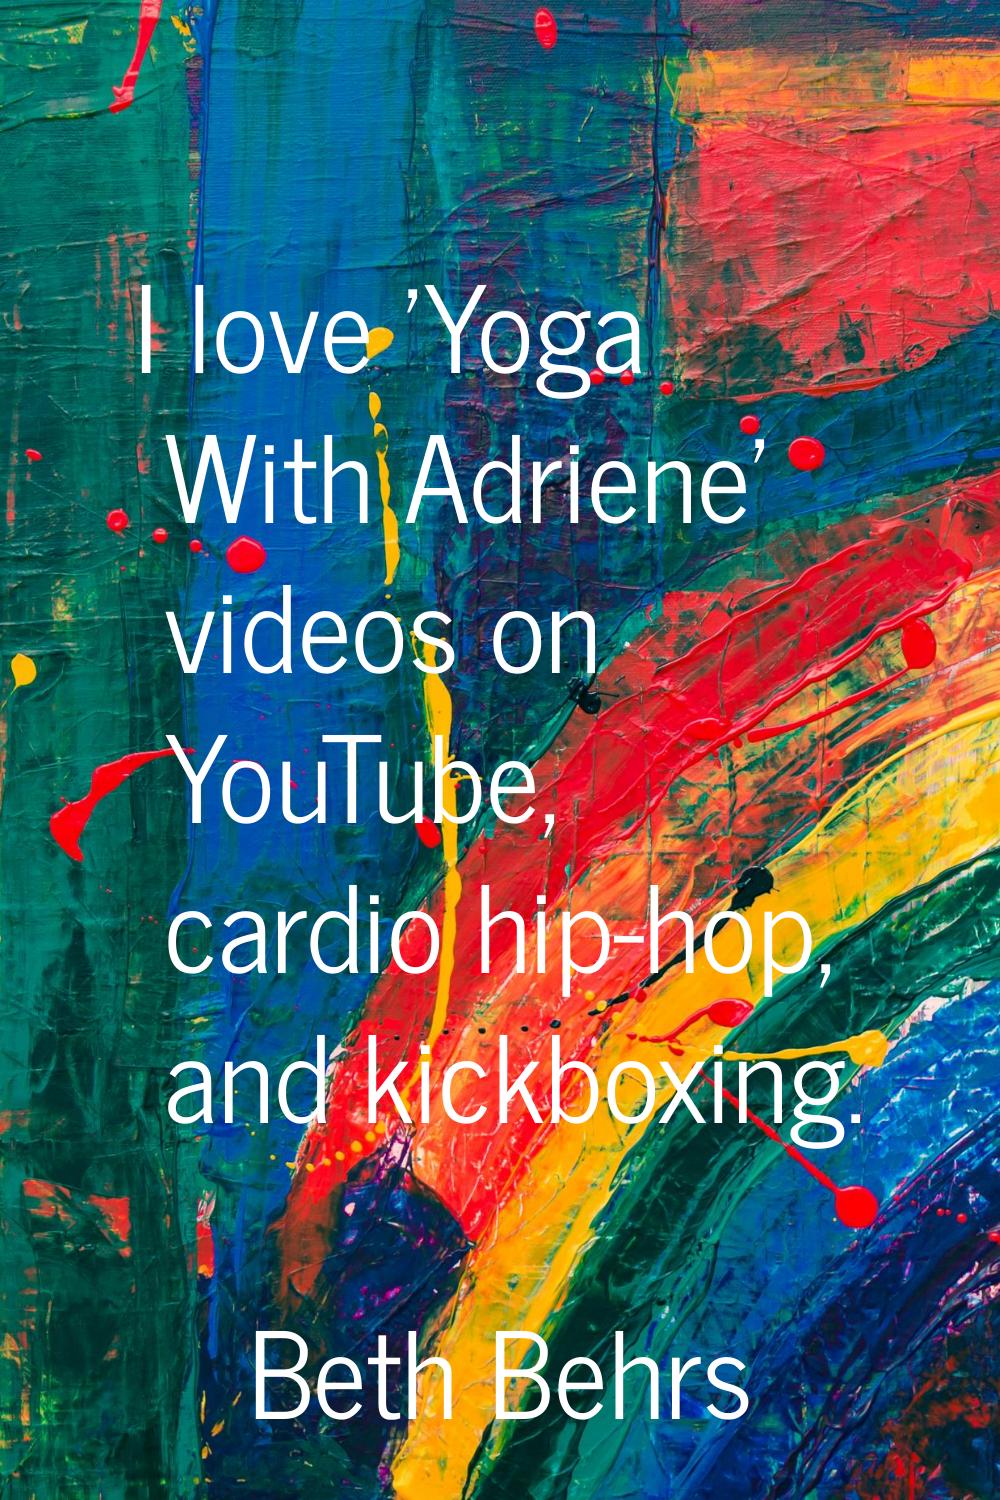 I love 'Yoga With Adriene' videos on YouTube, cardio hip-hop, and kickboxing.